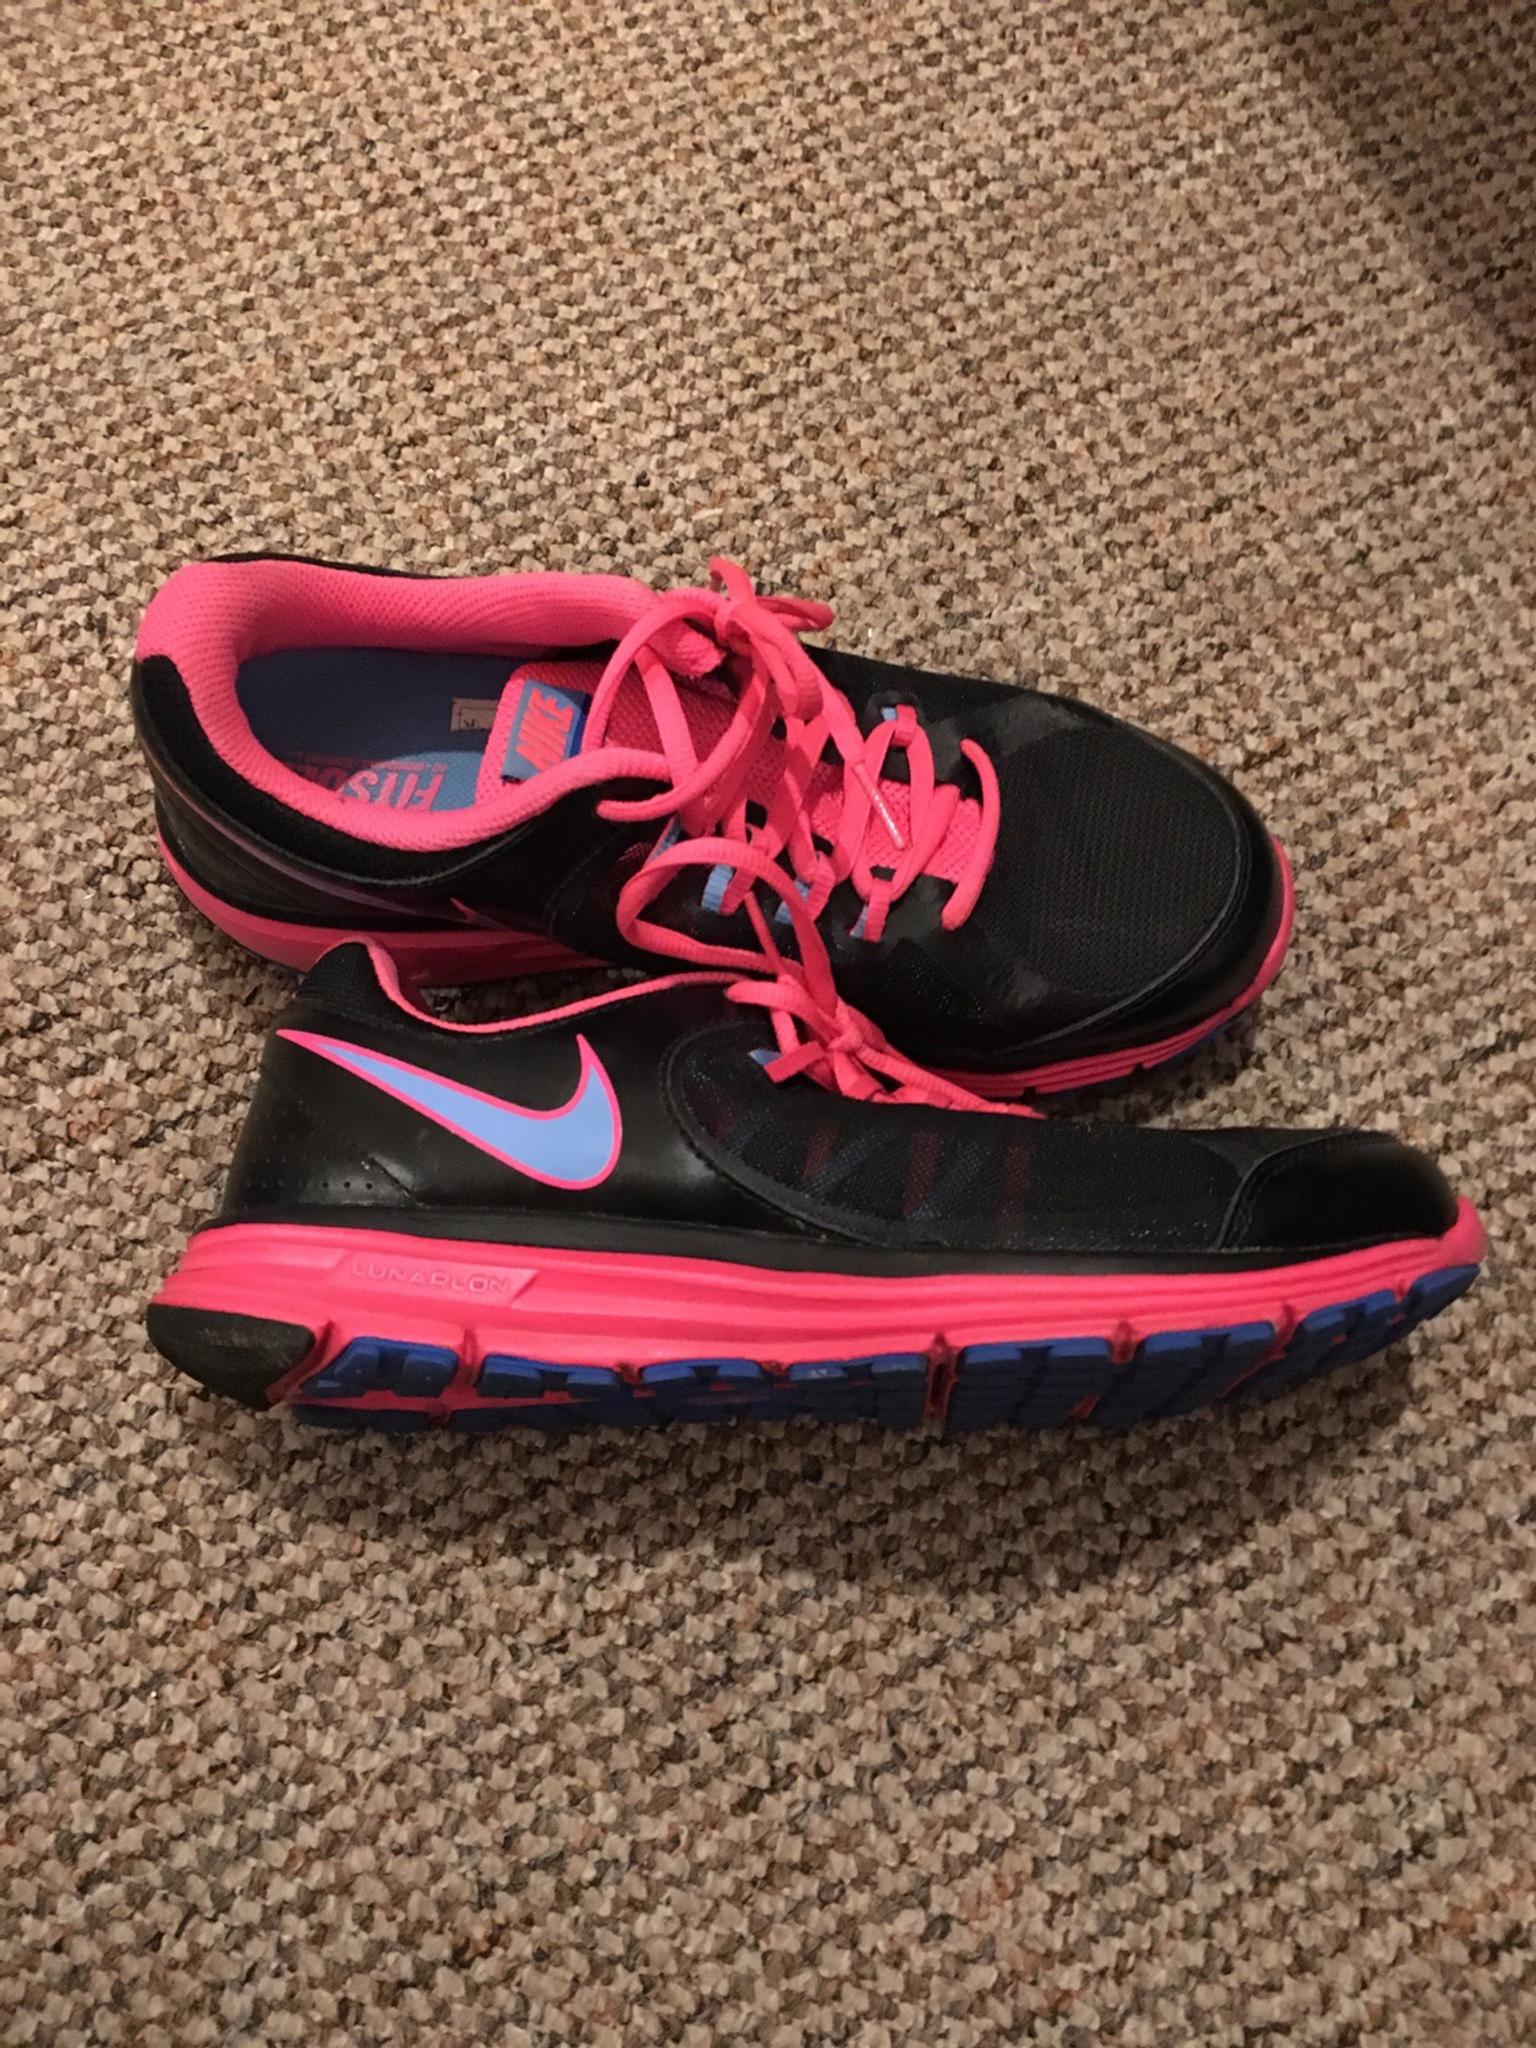 nike womens trainers black and pink